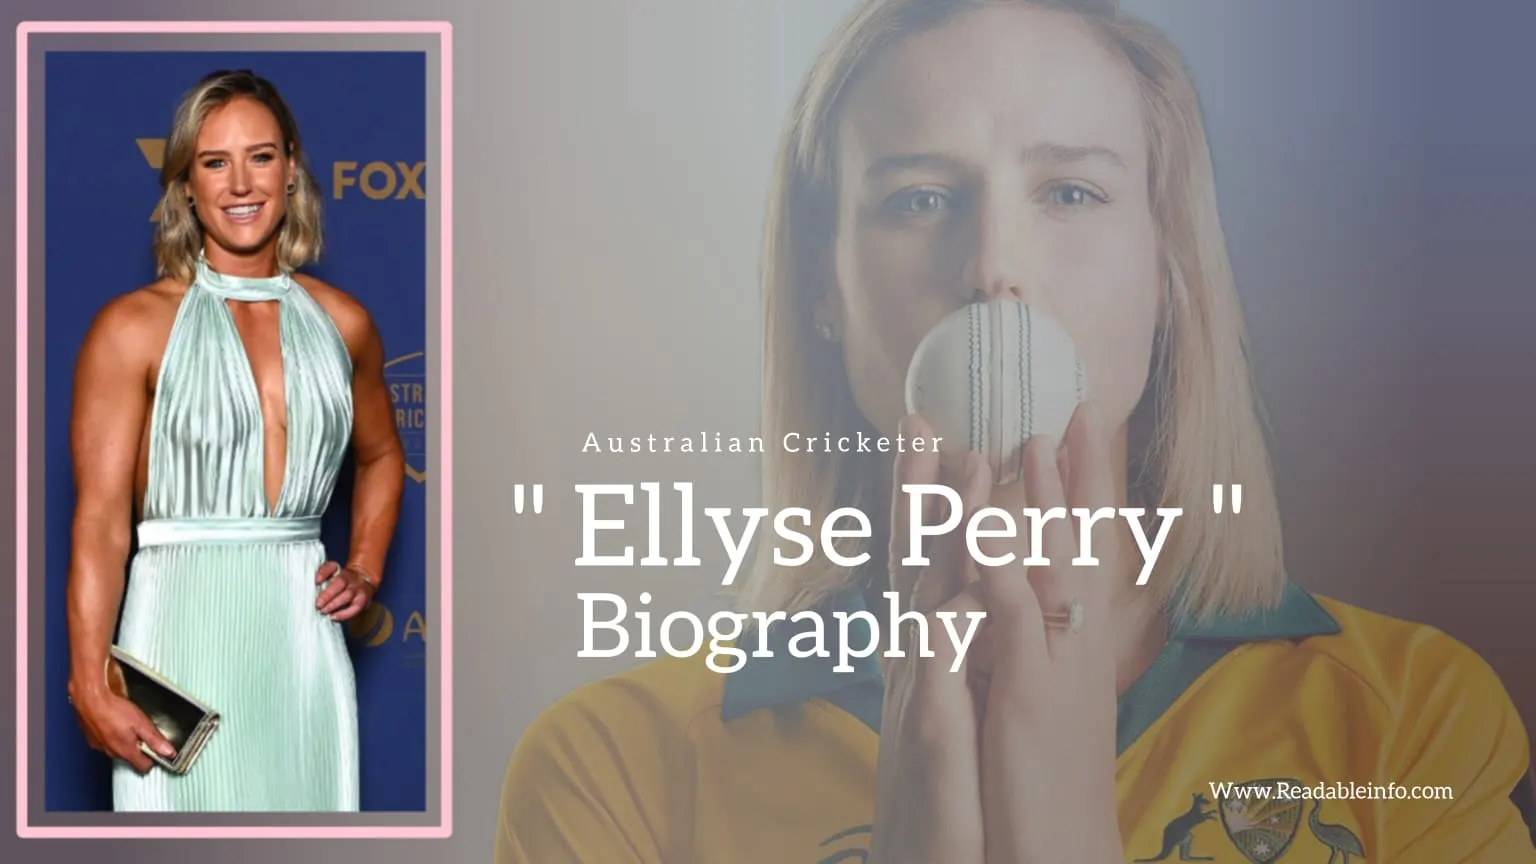 You are currently viewing Ellyse Perry Biography (Australian Cricketer)